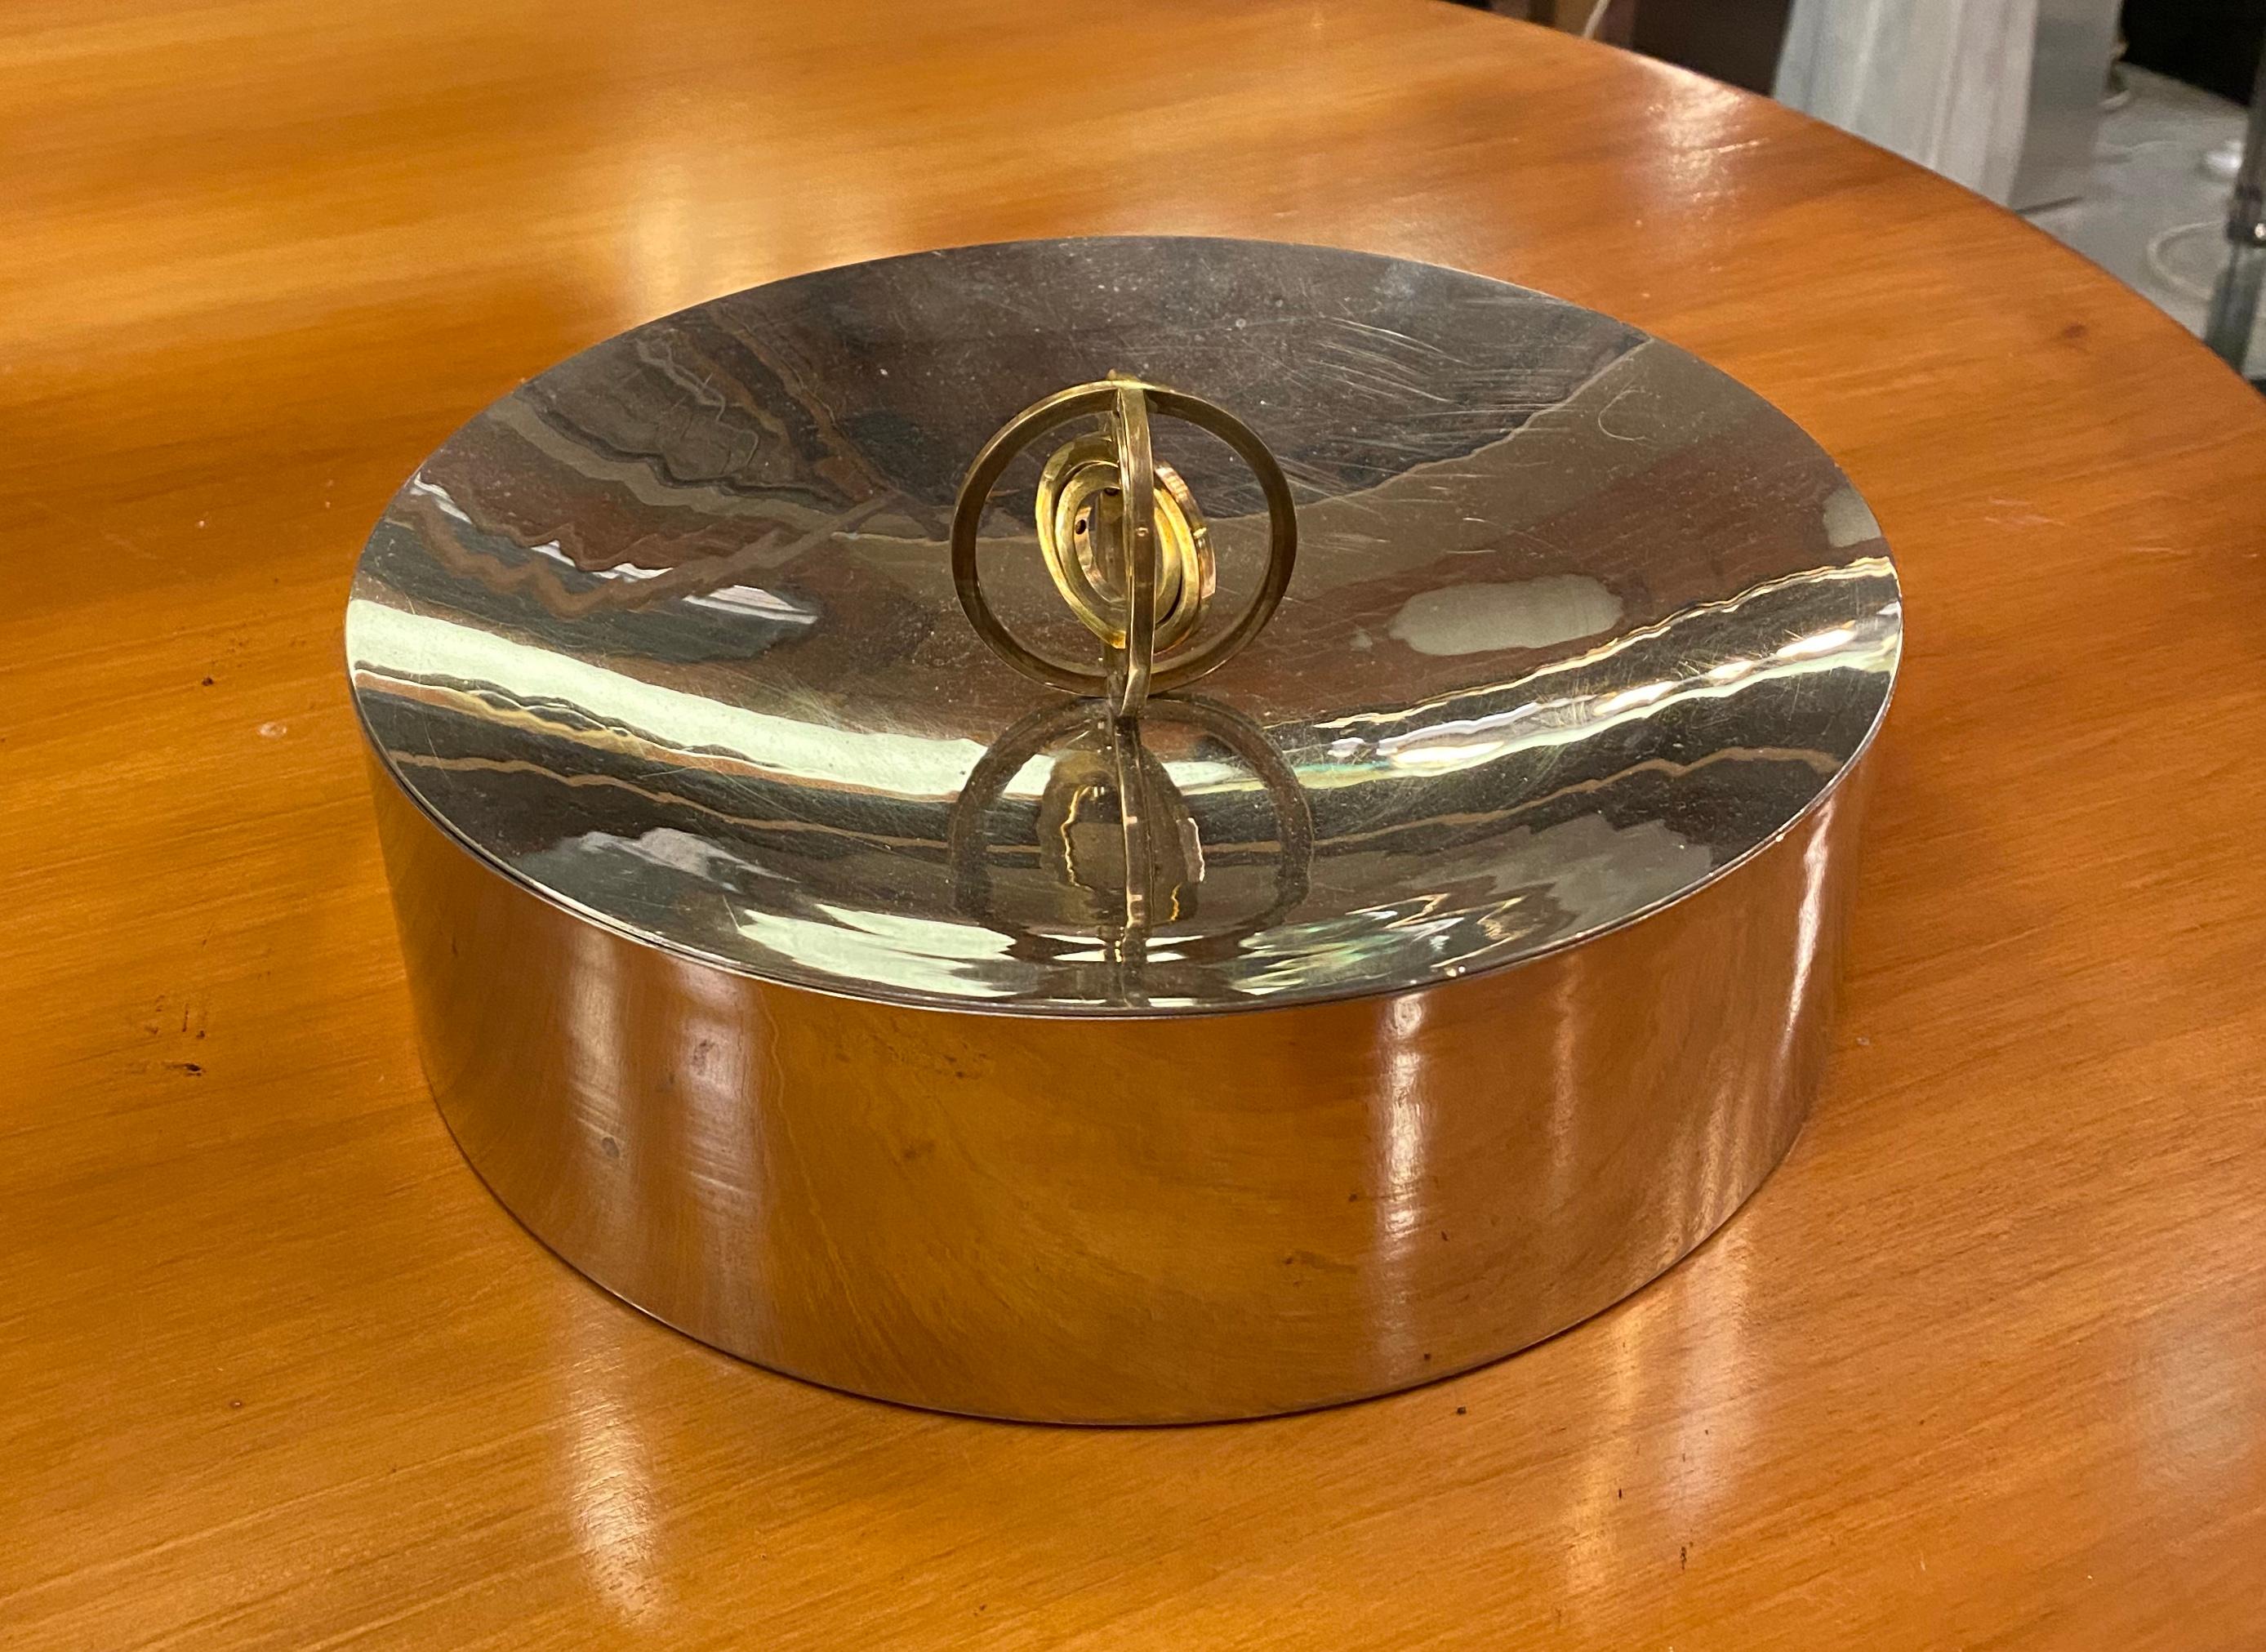 Beautiful Italian round cookie jar made in Italy 1960s in brass and silver.
As you can see from the pictures the inside has four compartments in order to divide your favorite cookies and the handle is made in brass.